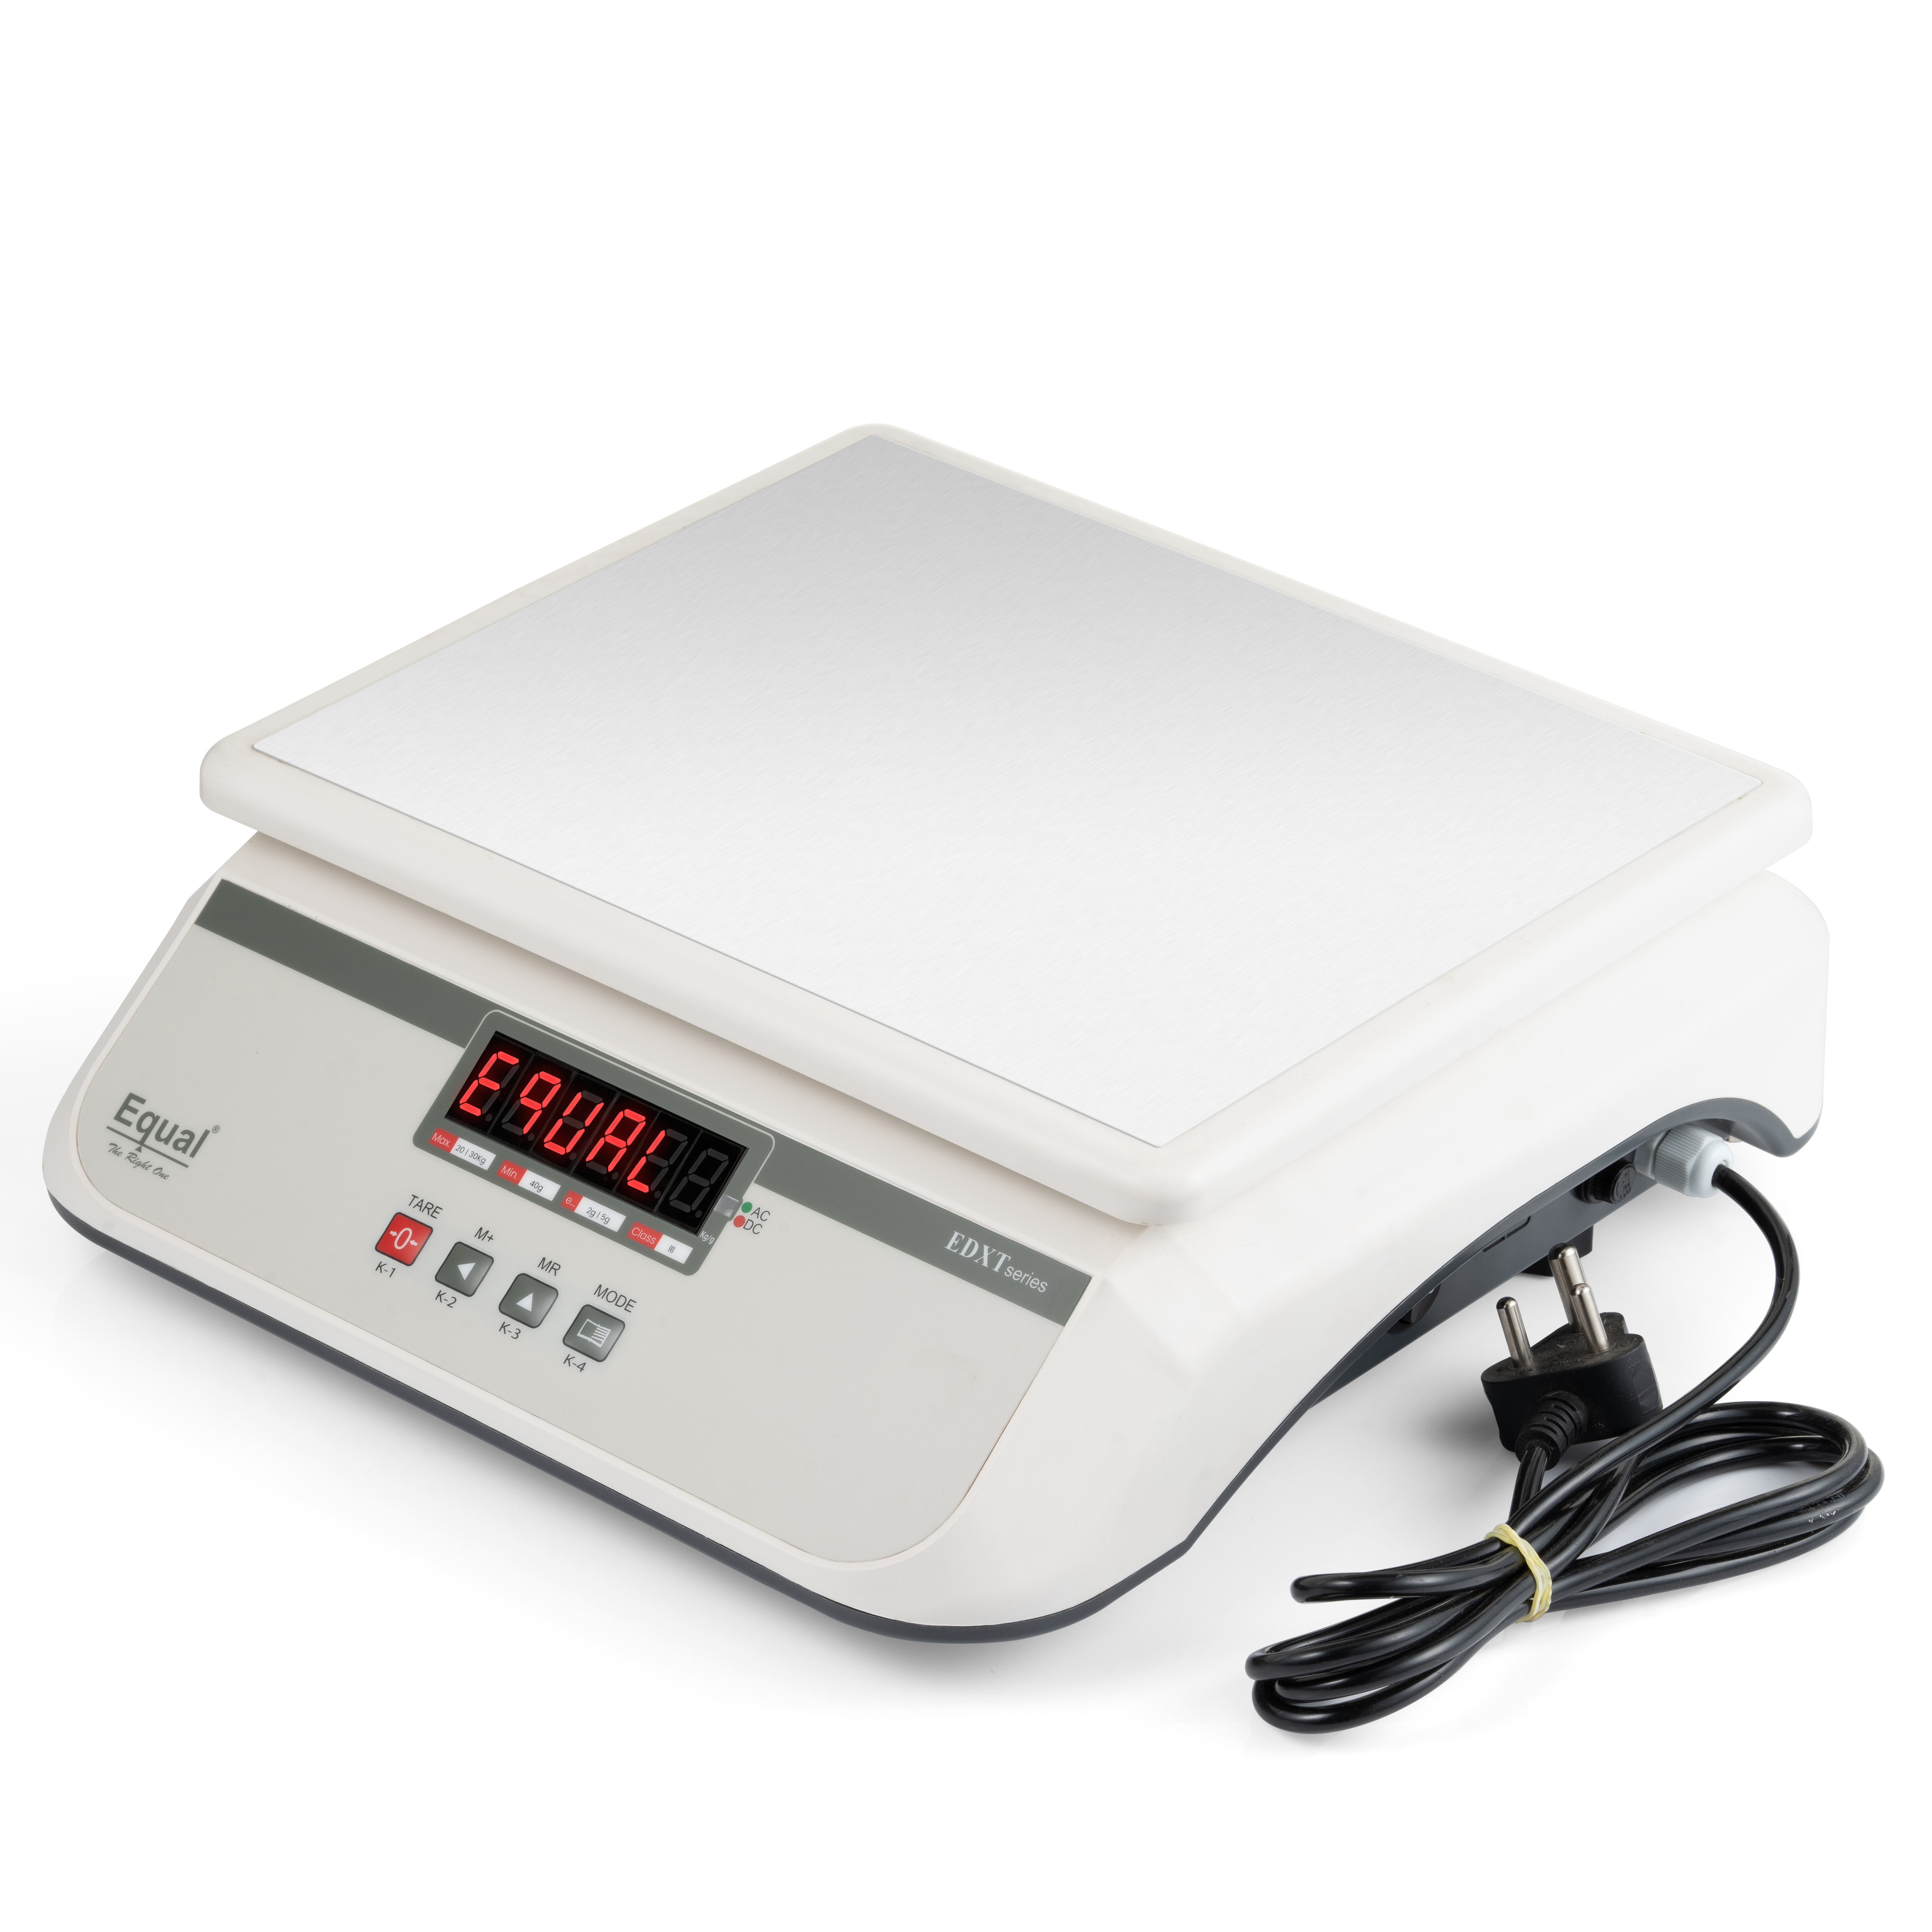 EDXT-02 Weighing scale